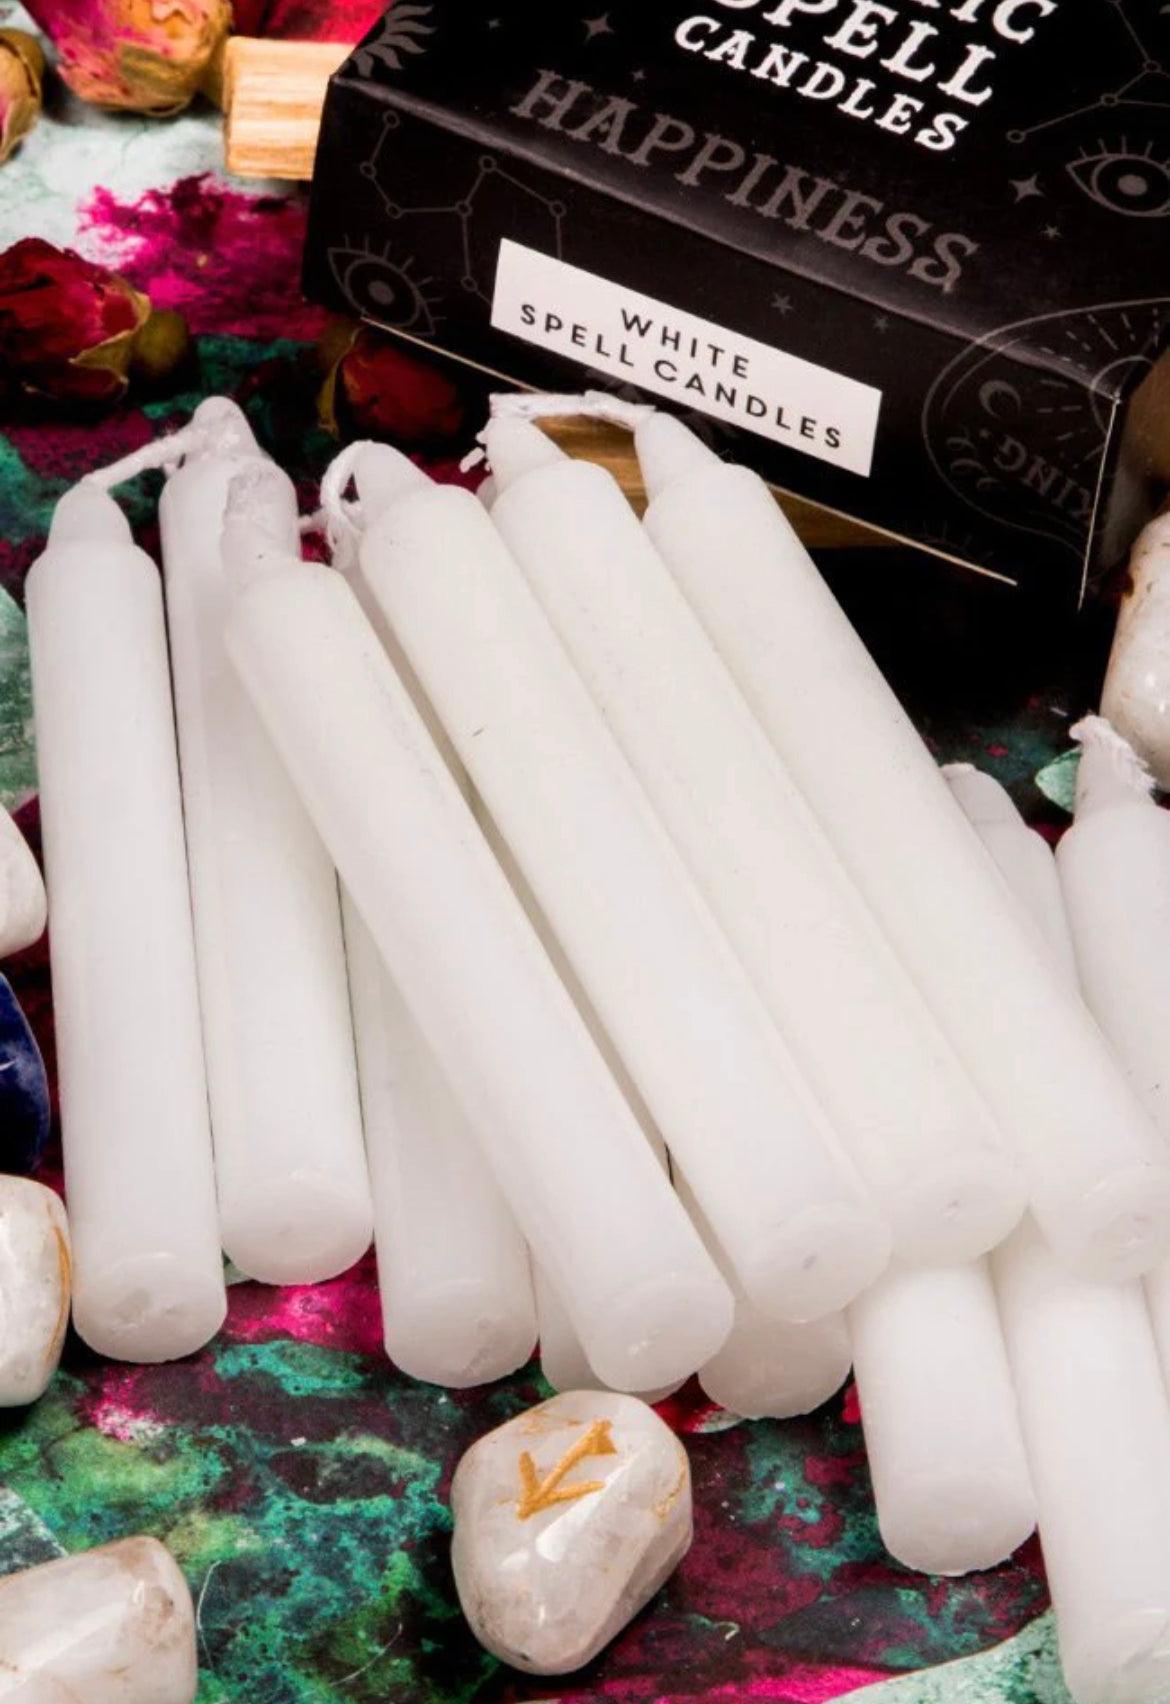 White Magic Ritual & Spell Candles - Muse Crystals & Mystical Gifts